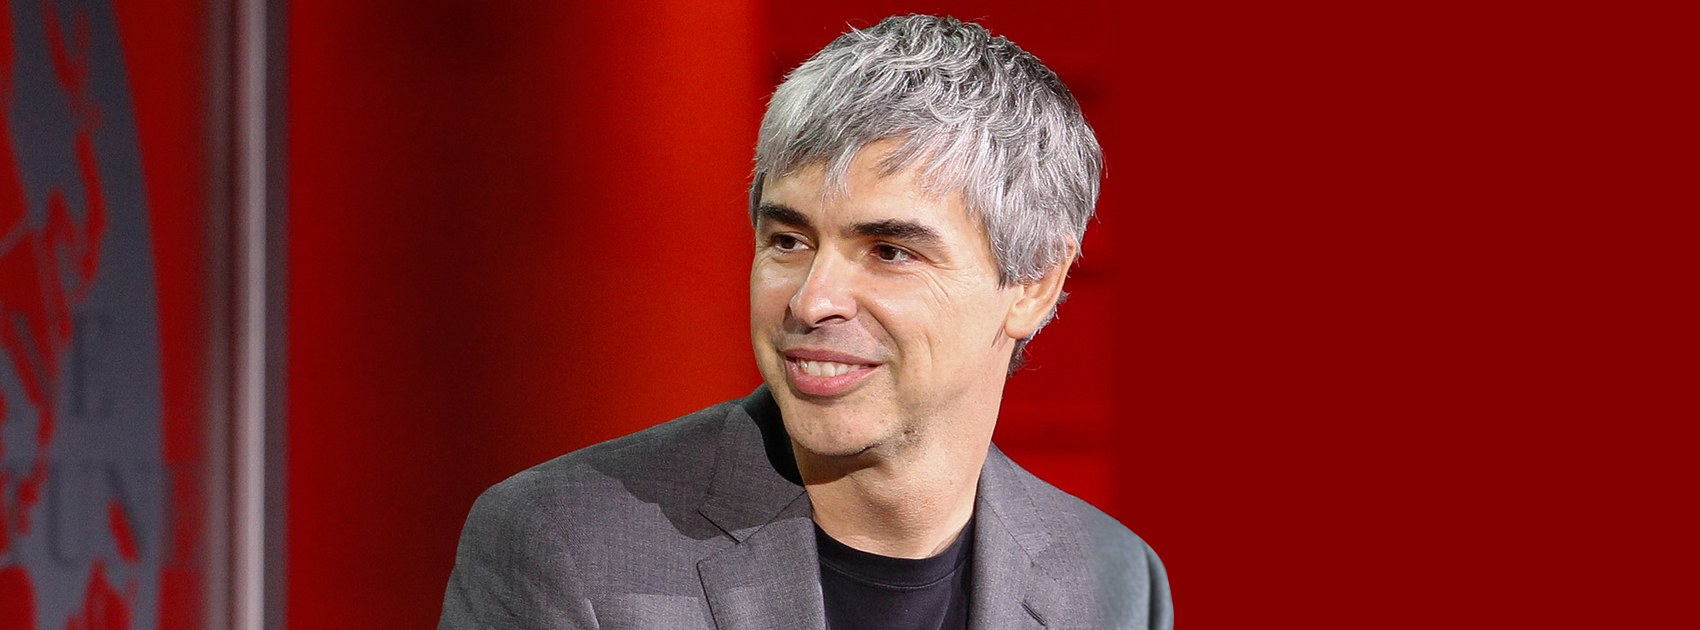 Larry Page Success Story,Startup Stories,Larry Page Lifestyle Story,Google Founder Larry Page,Google Founder Success Story,Google Journey,Larry Page Inspirational Story,2019 Best Motivational Stories,Larry Page Story,Google Founder,Larry Page Latest News